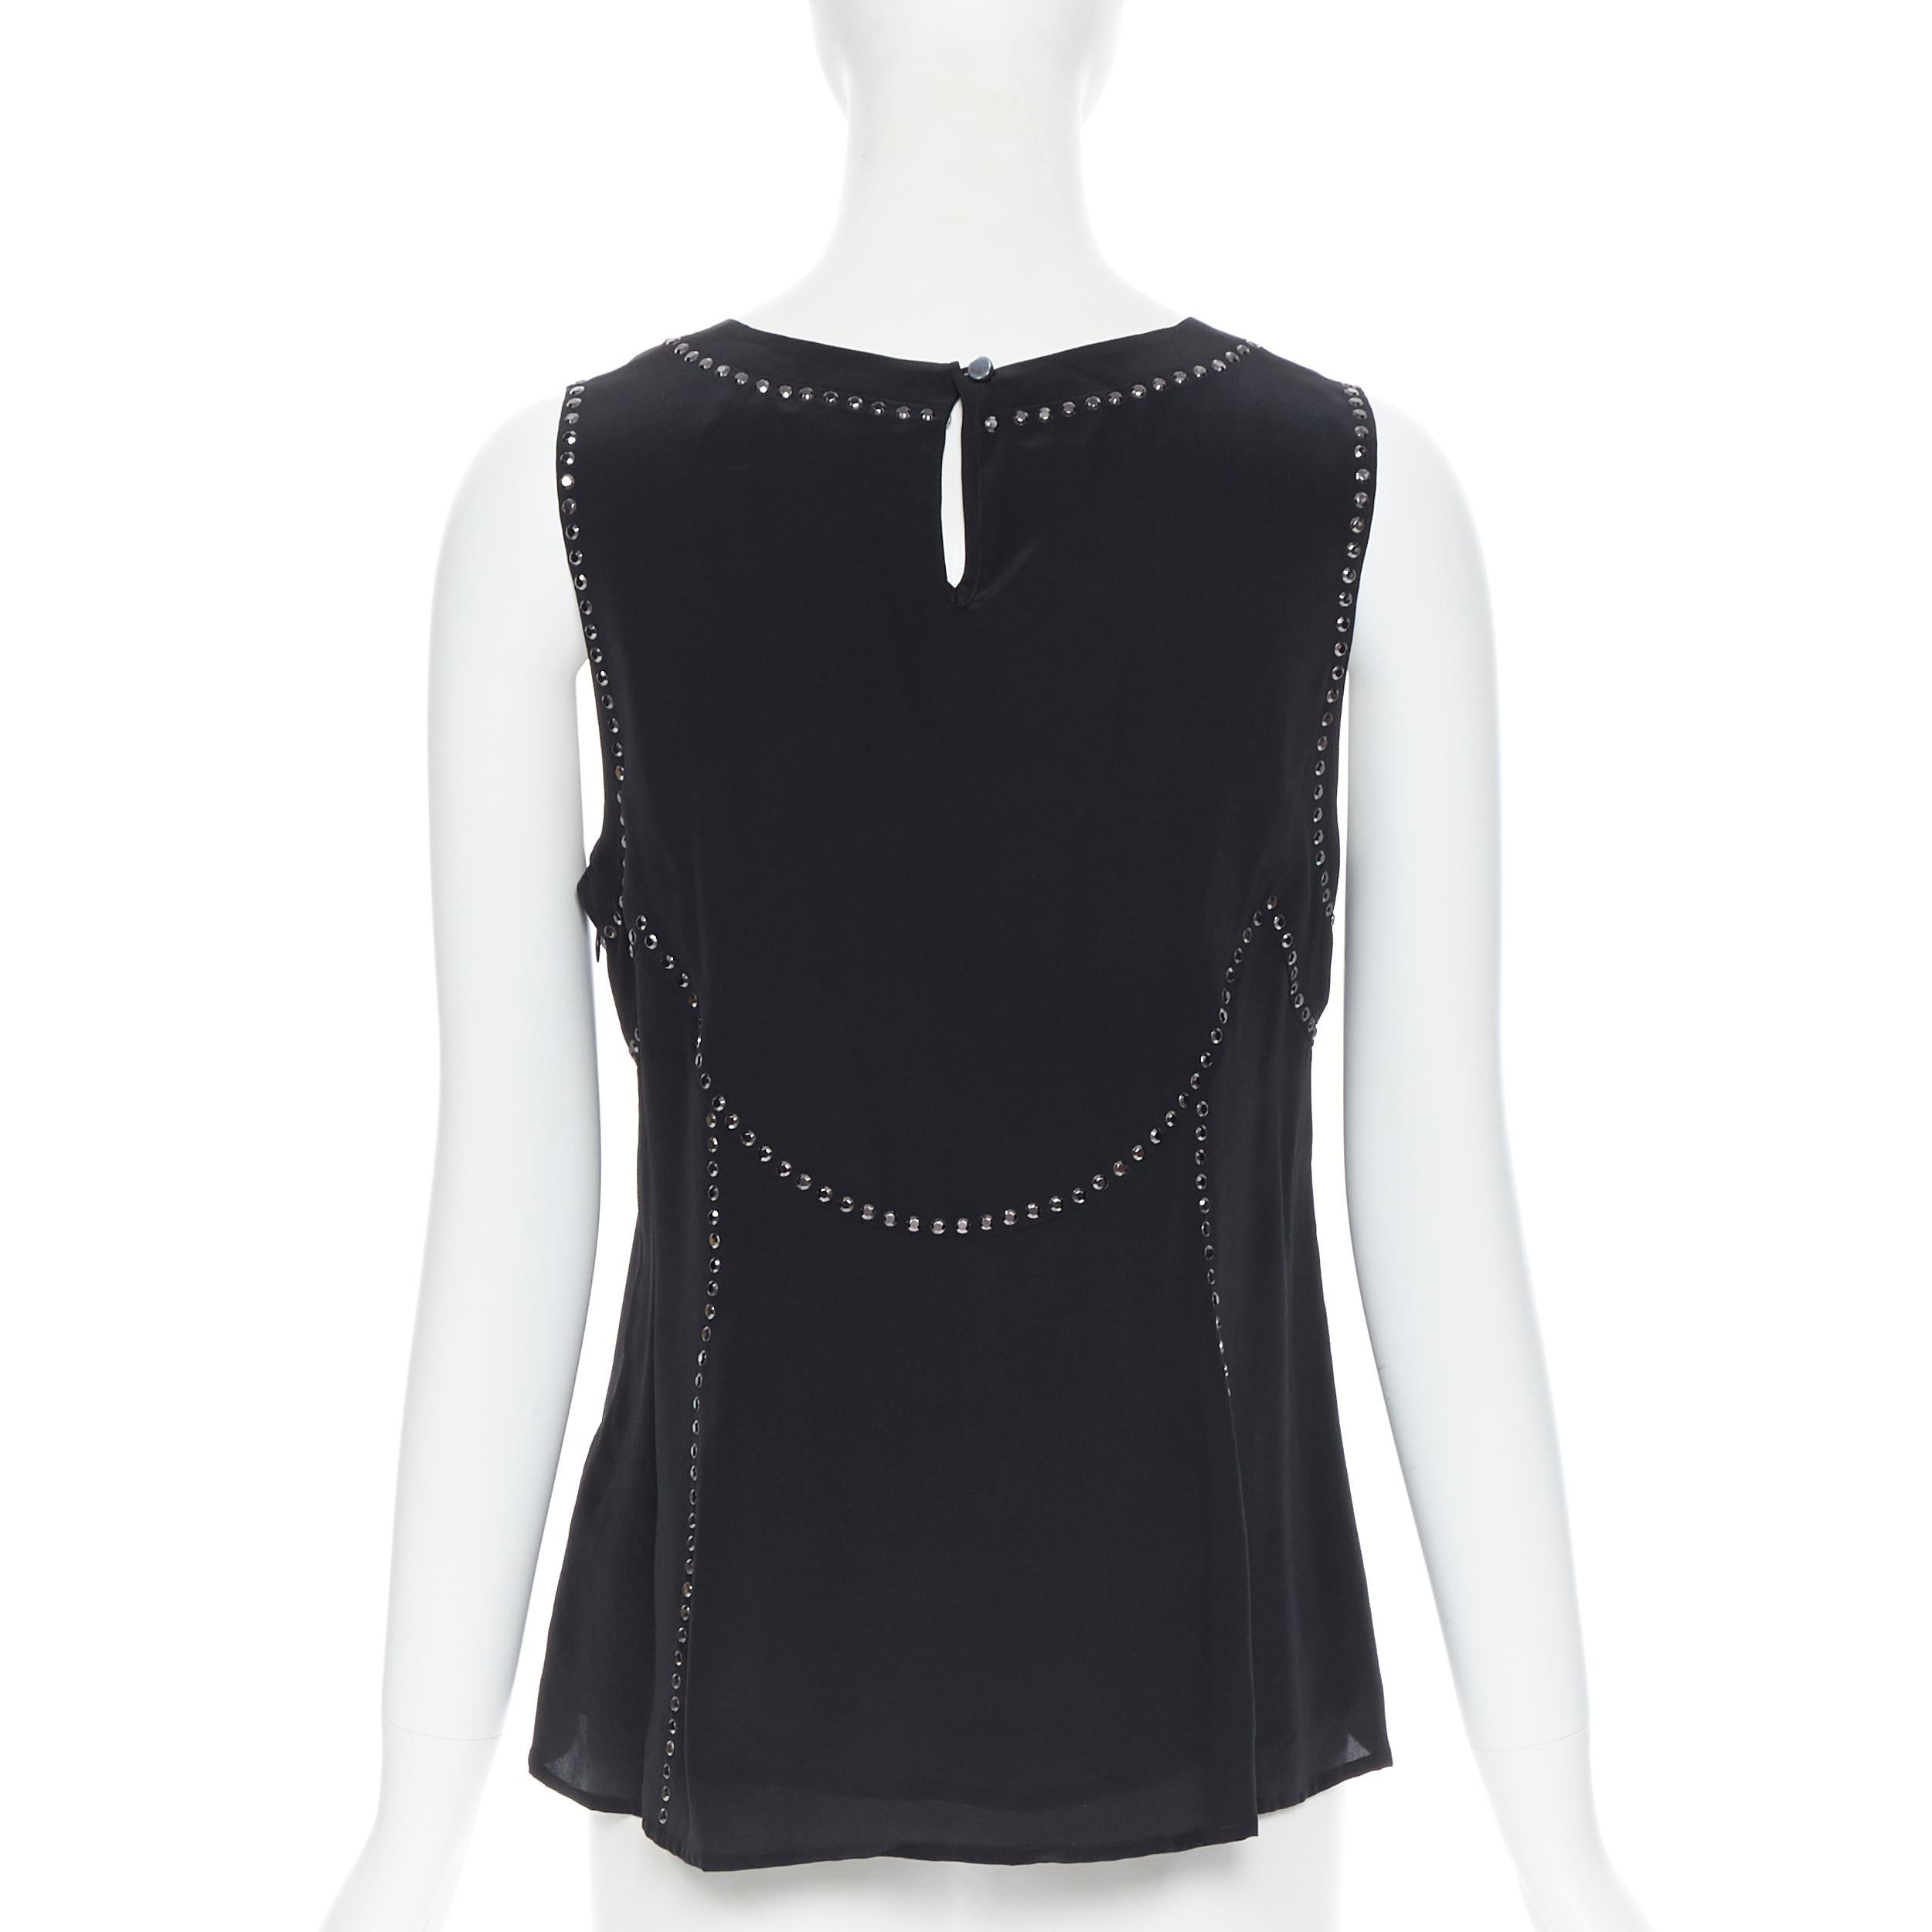 Women's new MARC BY MARC JACOBS 100% black silk crystal embellished shell vest top S